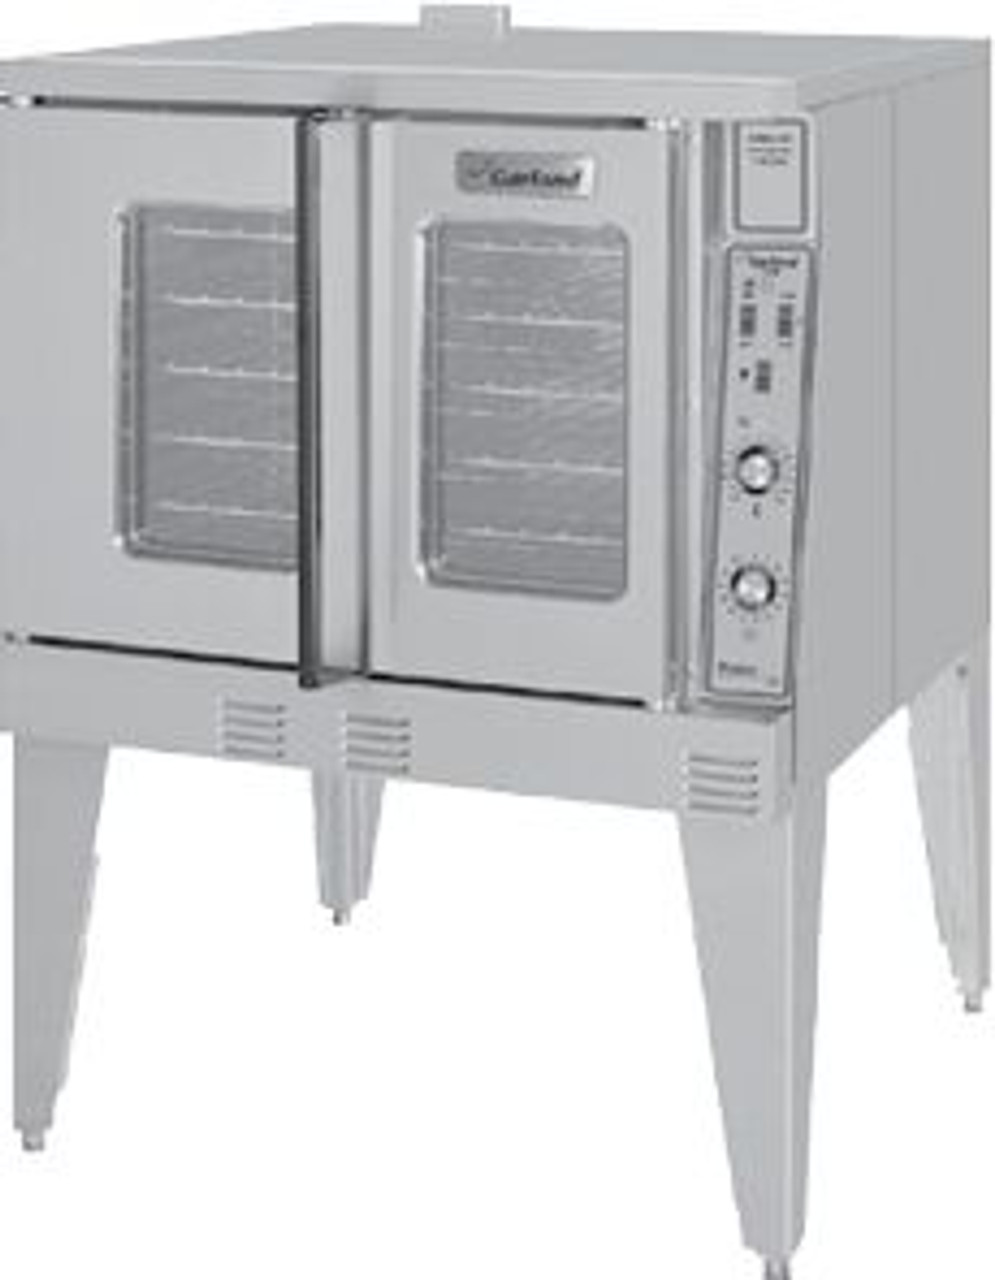 Garland US Range MCO-ED-10-S Deep Full Size Convection Oven